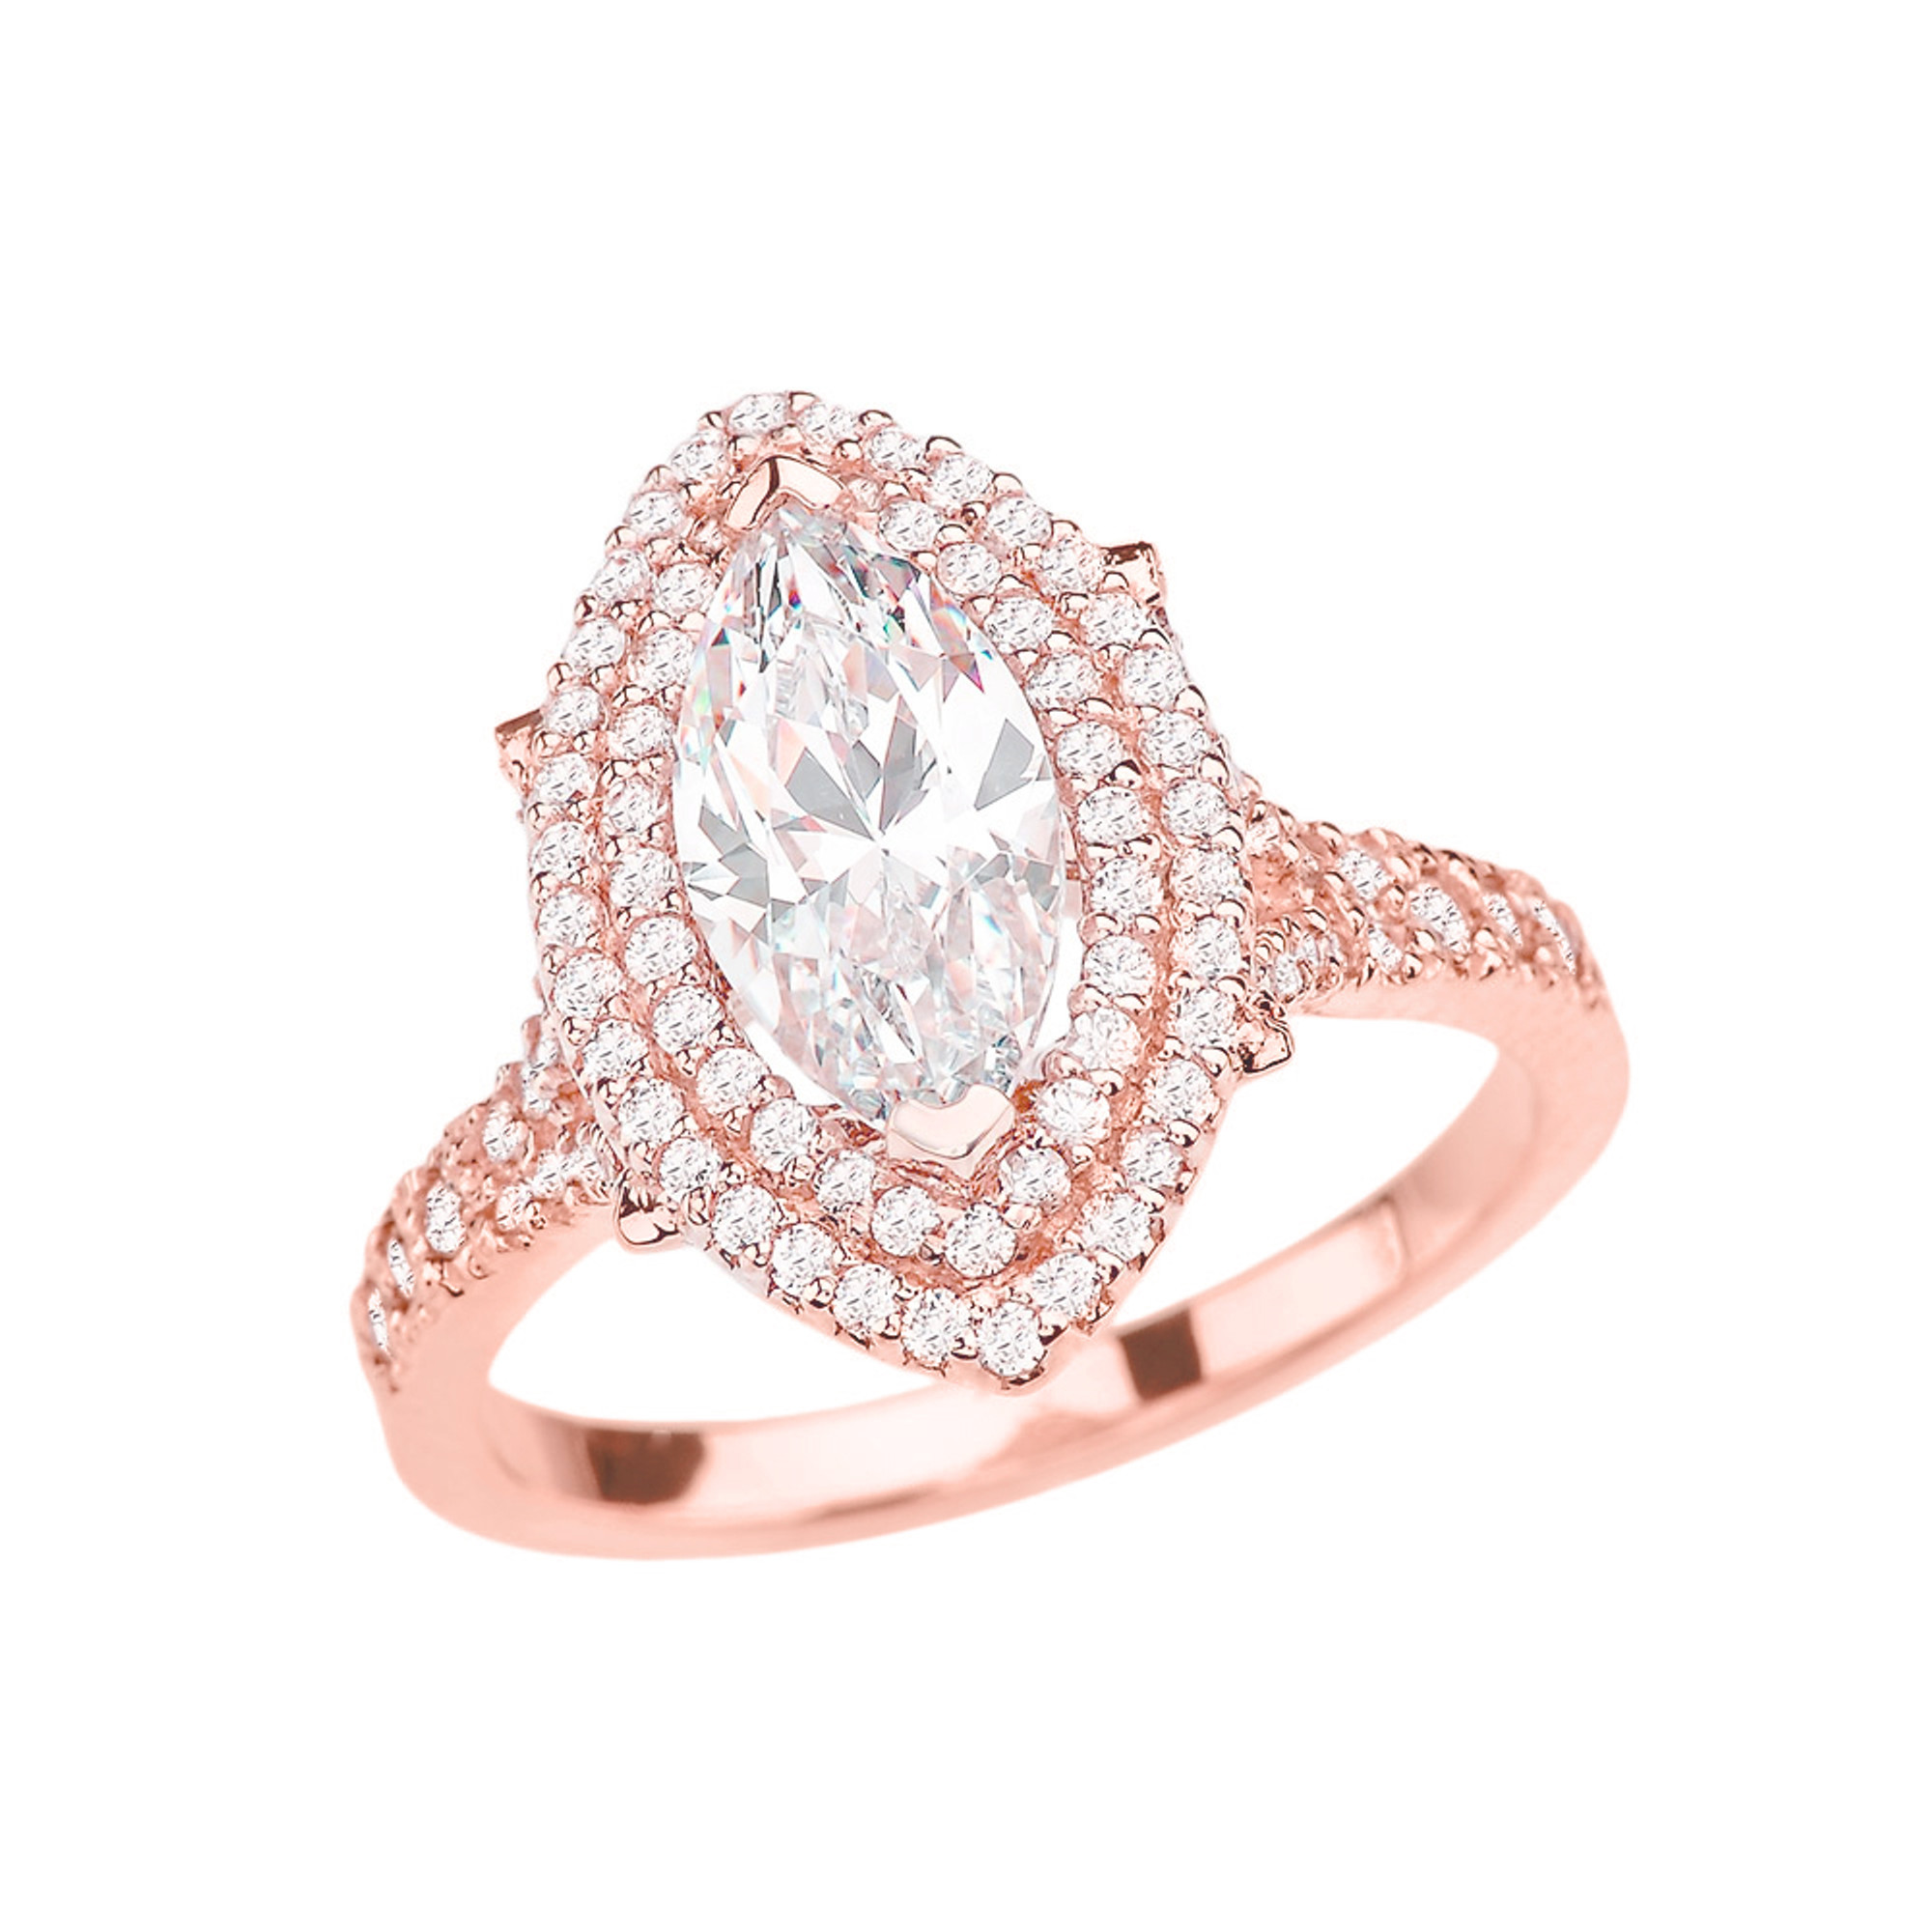 Rose Gold Double Raw Halo Diamond Engagement Ring With 3 Ct Marquise Cubic Zirconia In The Center